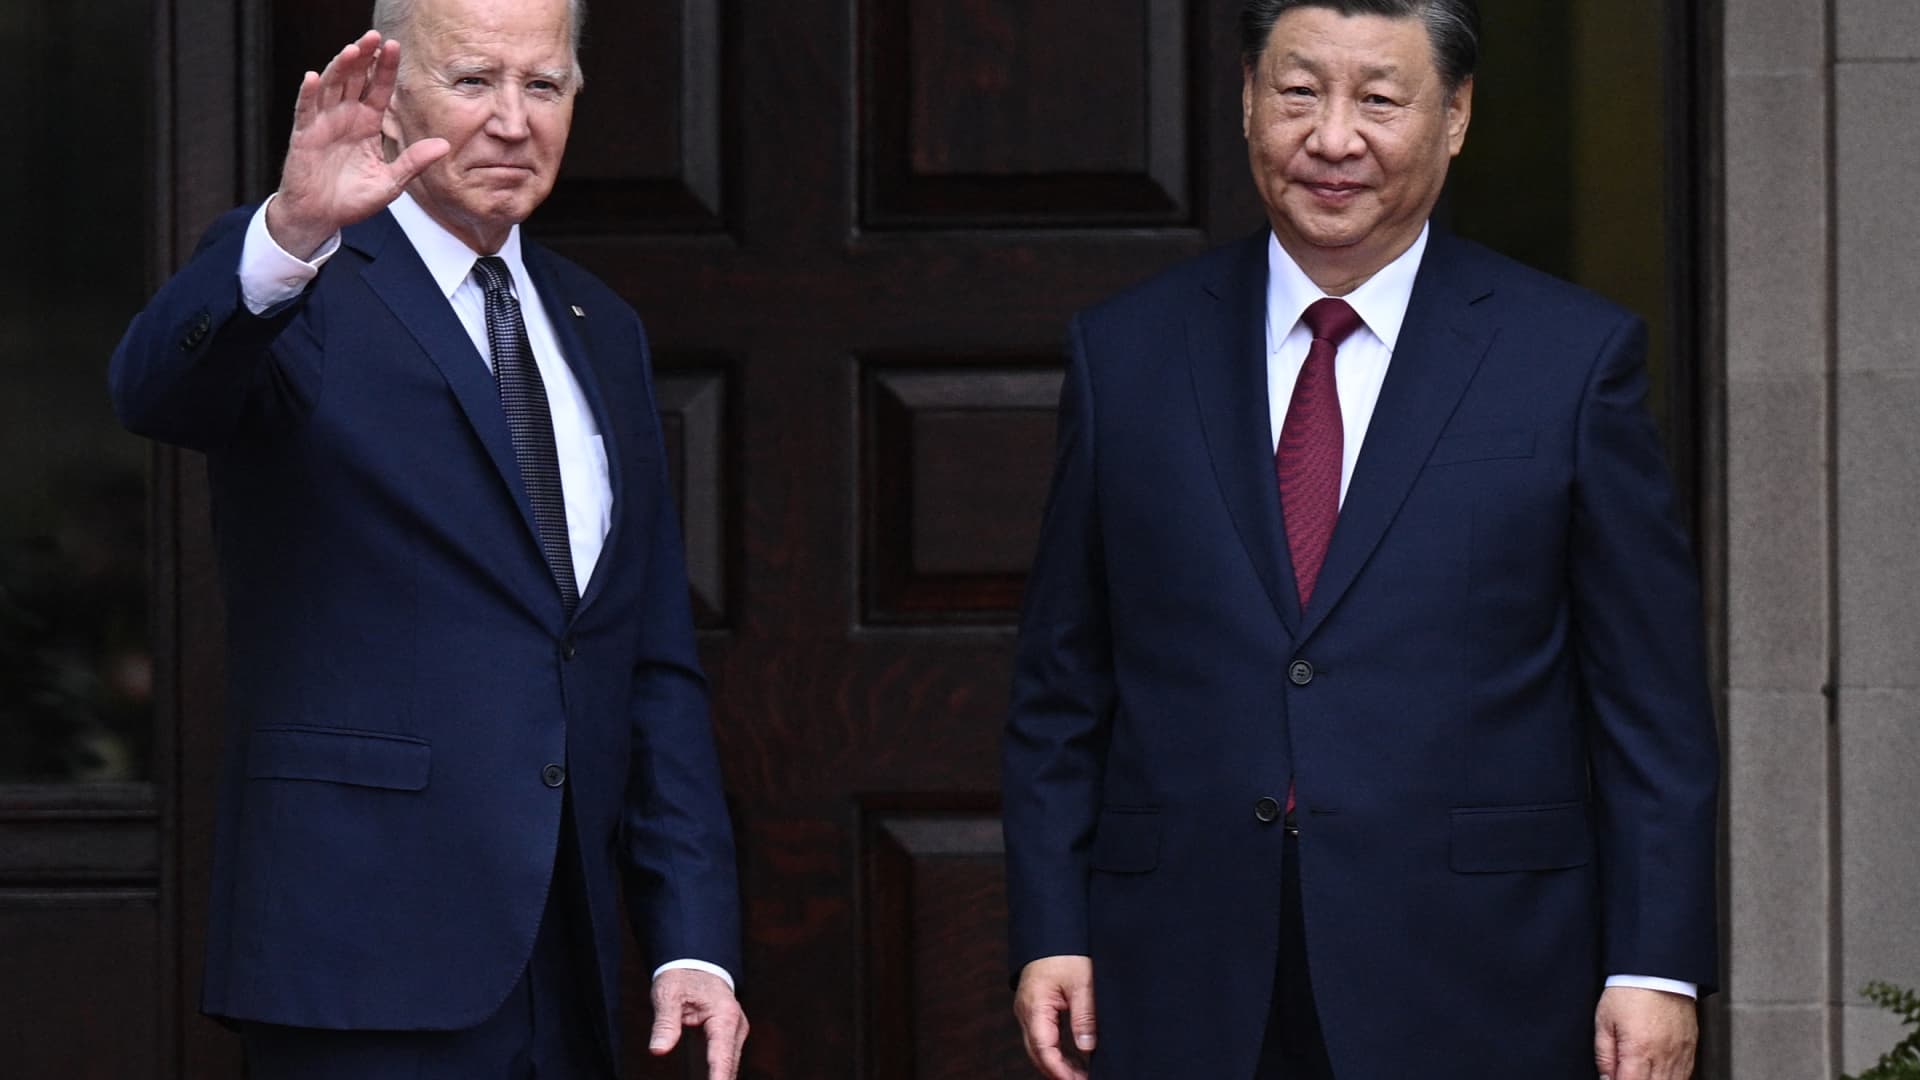 U.S., China will seek to limit rising tensions amid domestic challenges, risk analyst says